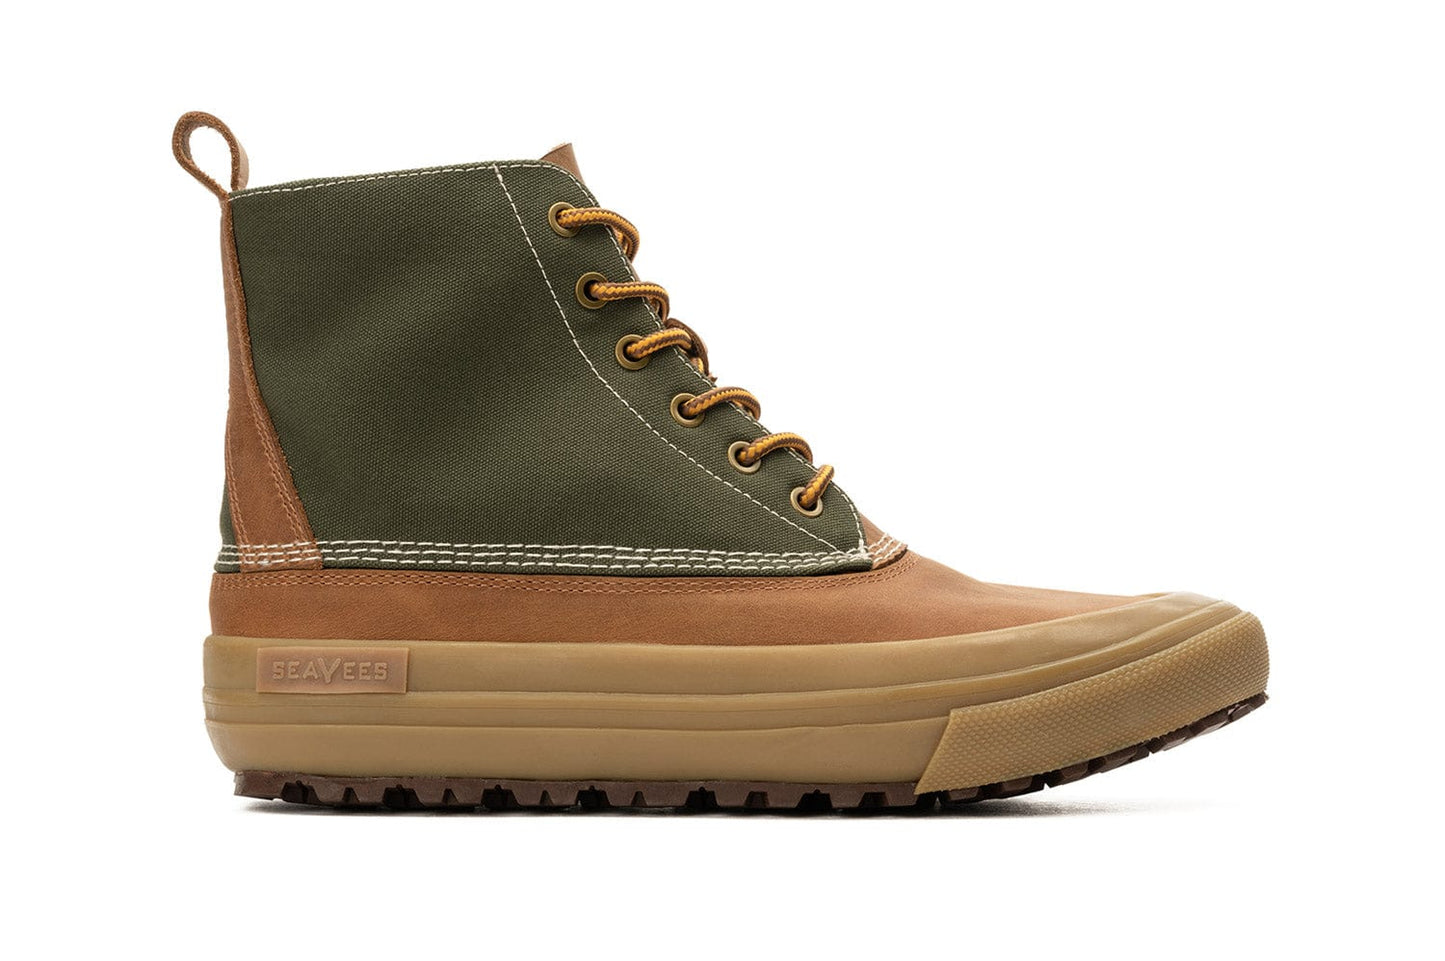 Side profile of Cascade Range boot in Cashew/Olive with contrast stitching and looped pull tab, against a neutral background.